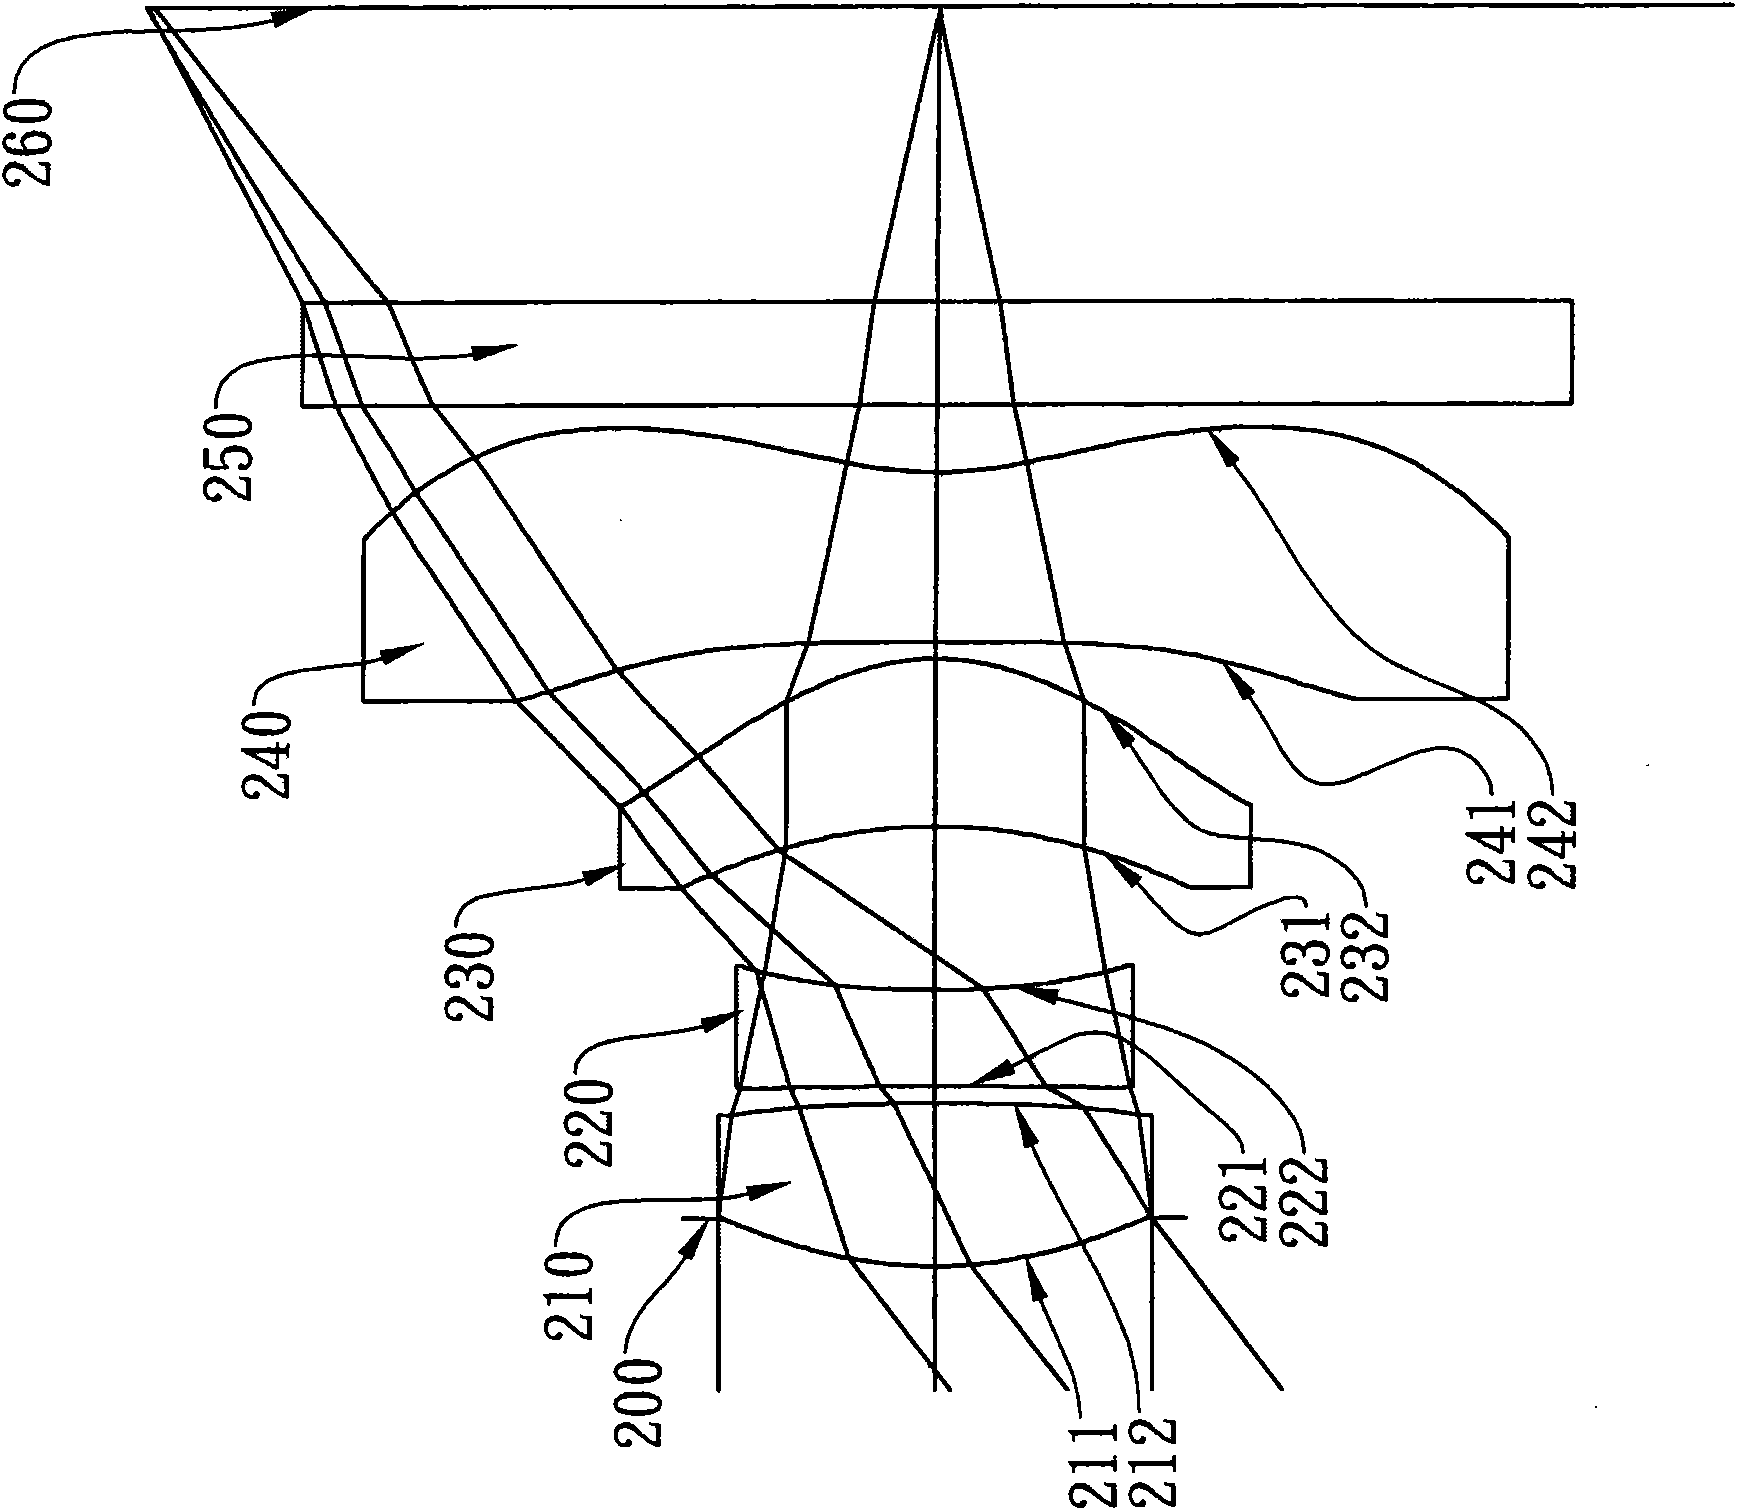 Photographic optical lens group